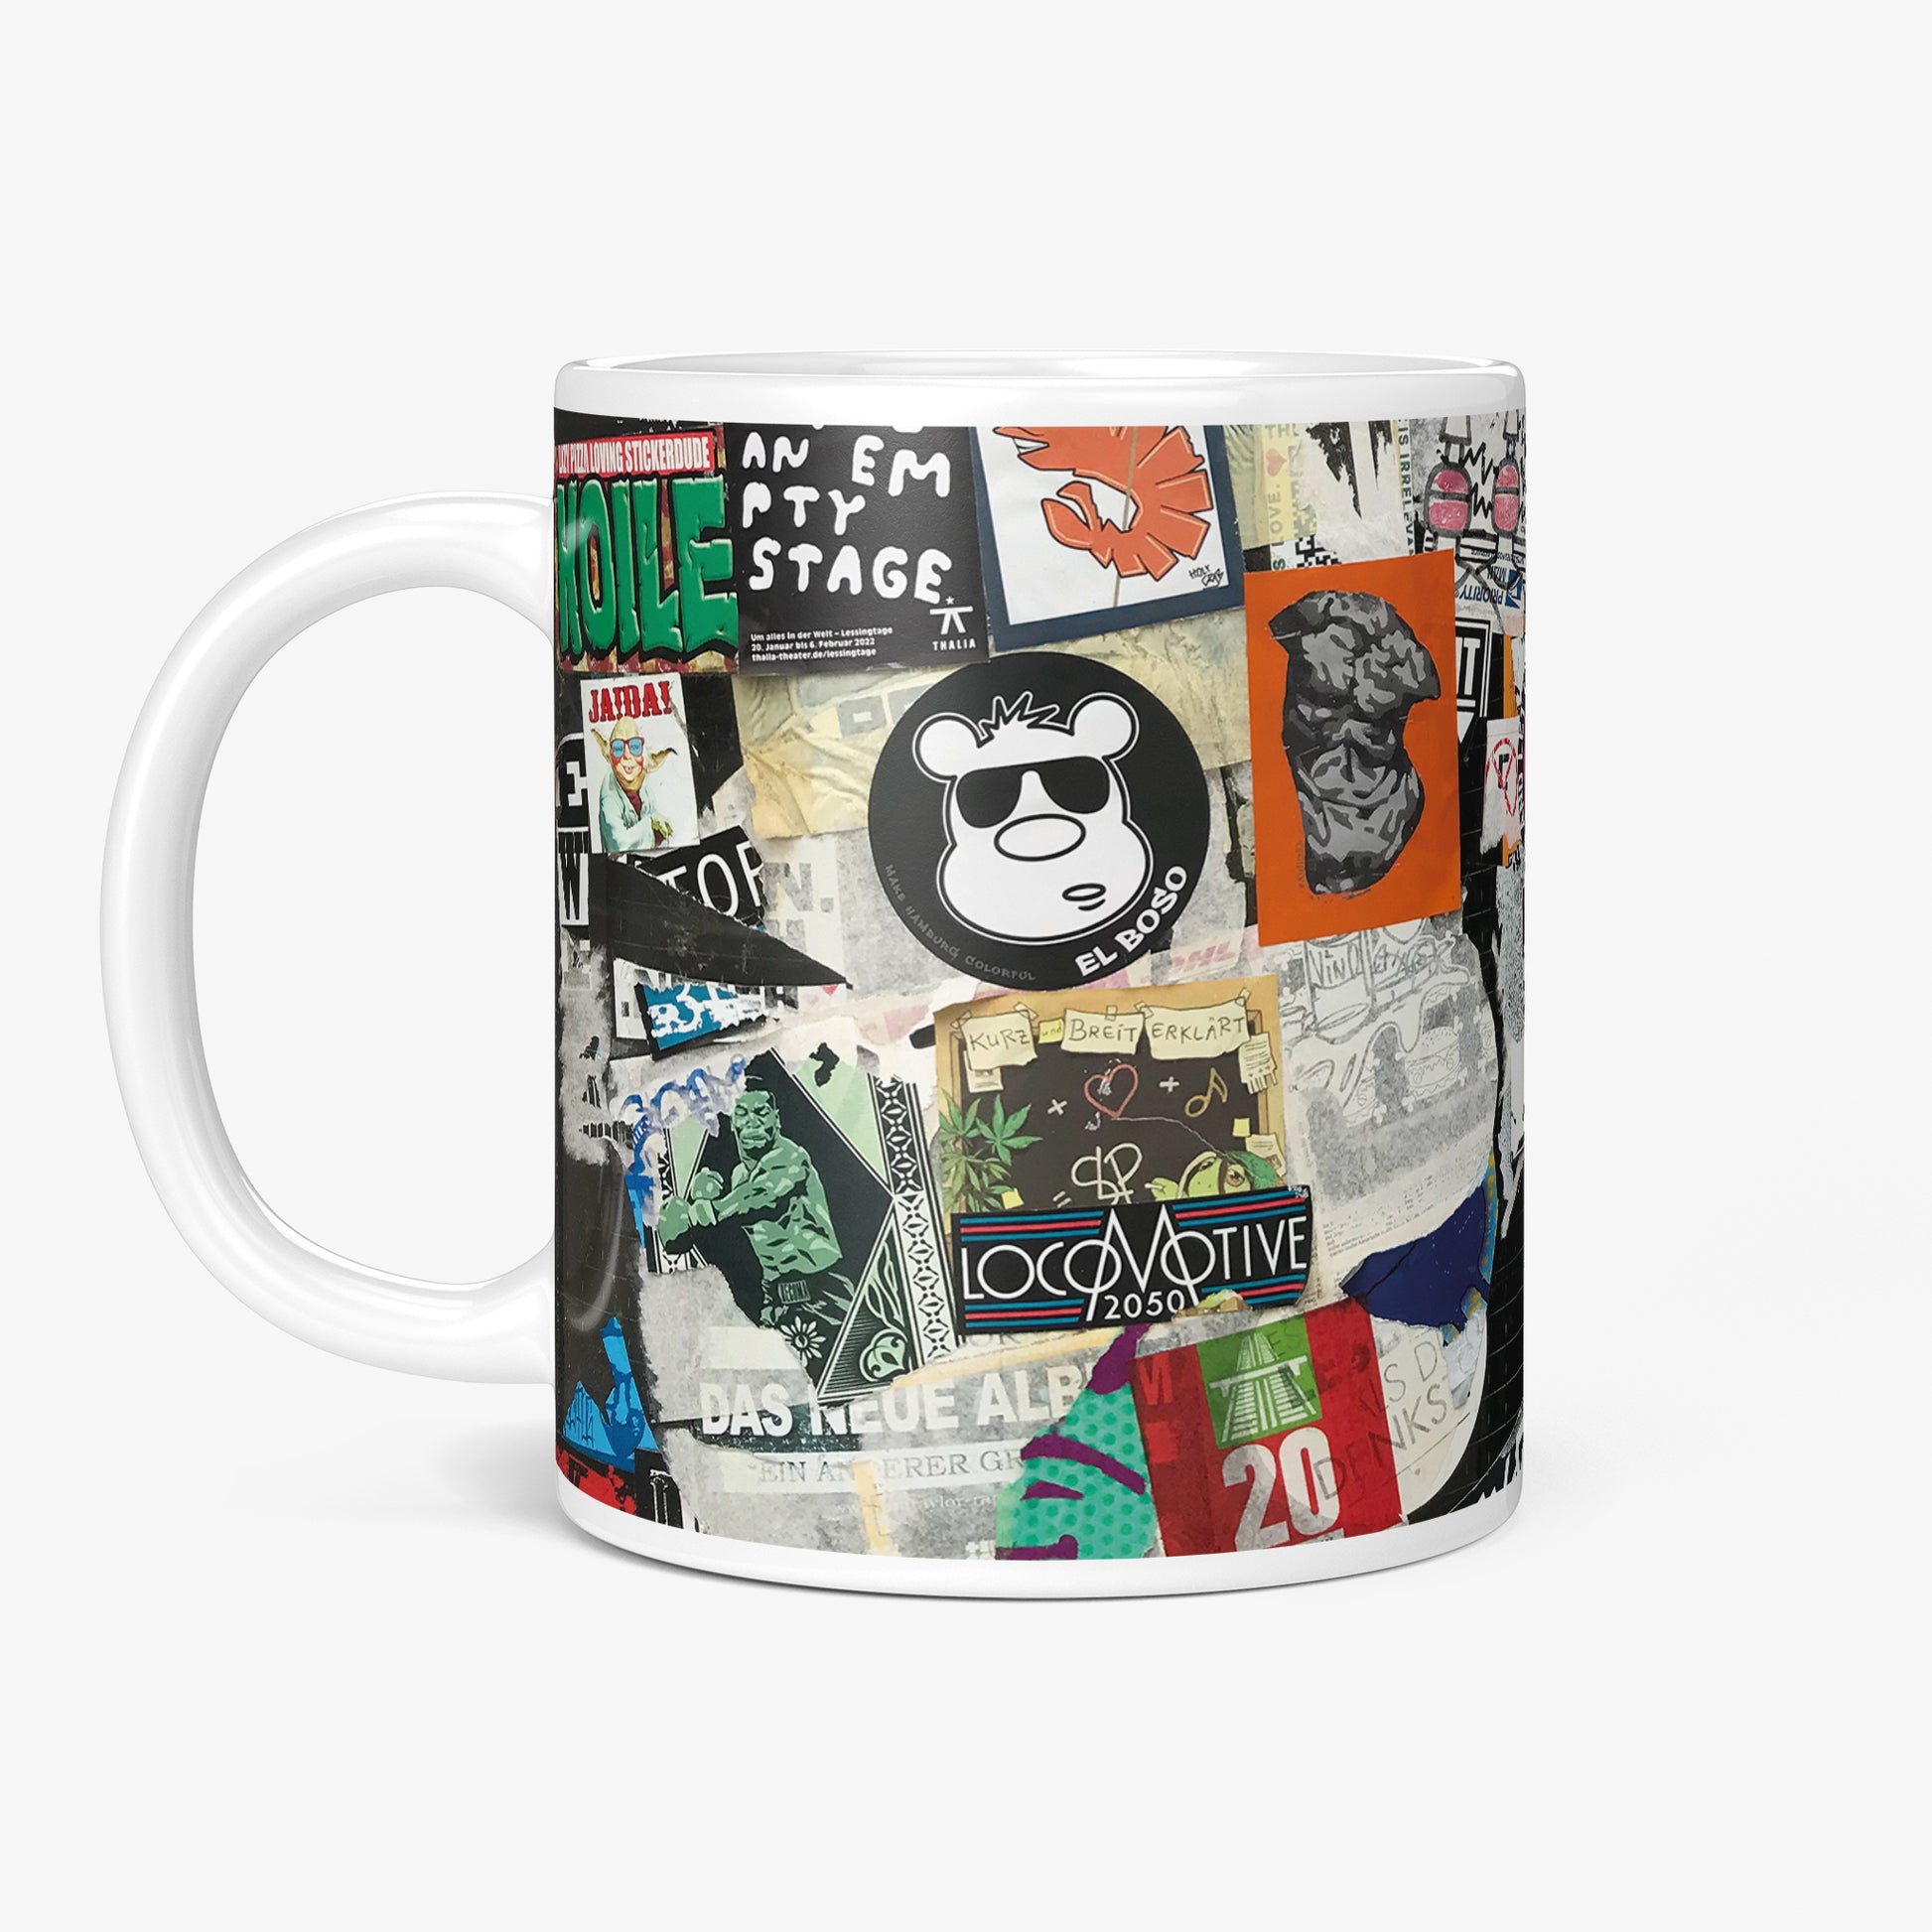 Be inspired by our Urban Art Coffee Mug – To Live And Let Live - No2 from Hamburg. Featuring a 11oz size with the handle on the left. The urban billboard design lends an authentic urban feel to the mug, making it resemble a piece of street art itself.